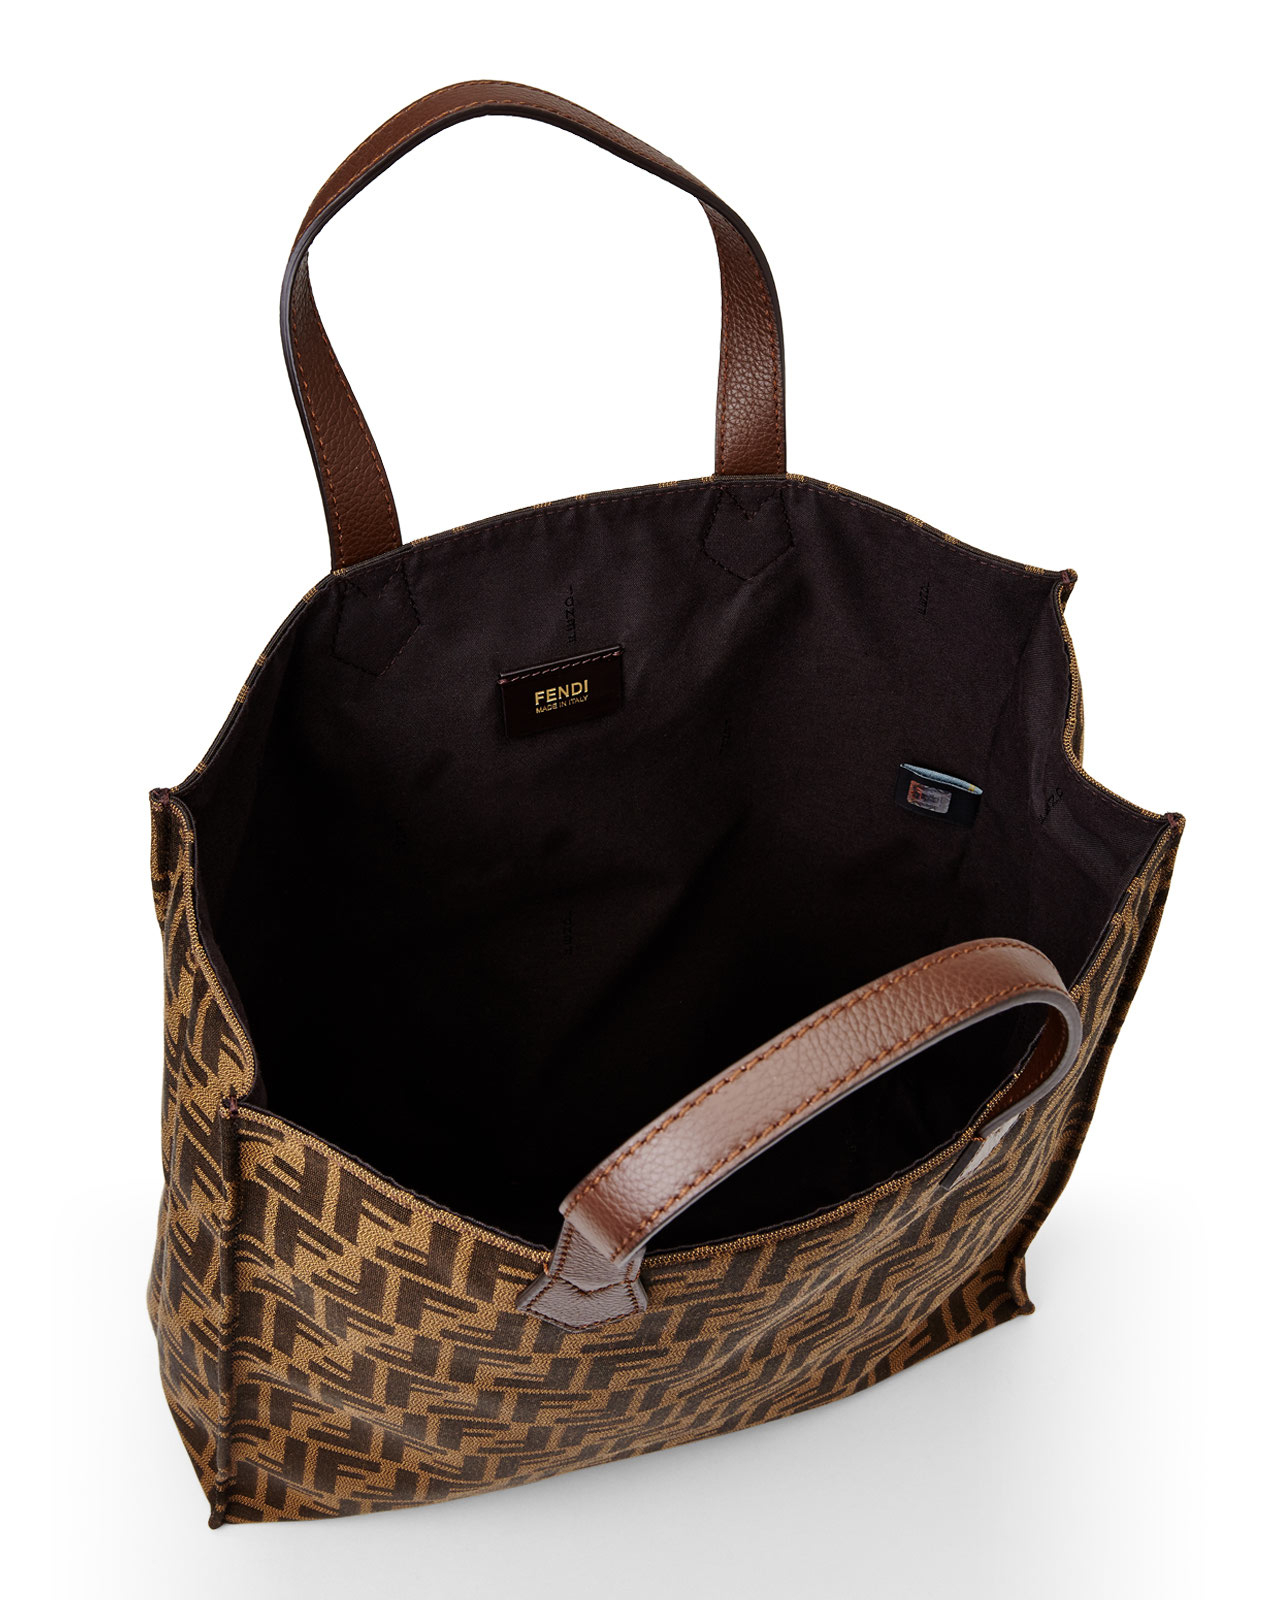 Lyst - Fendi Brown And Black Canvas Zucca Pattern Large Tote Bag in Brown